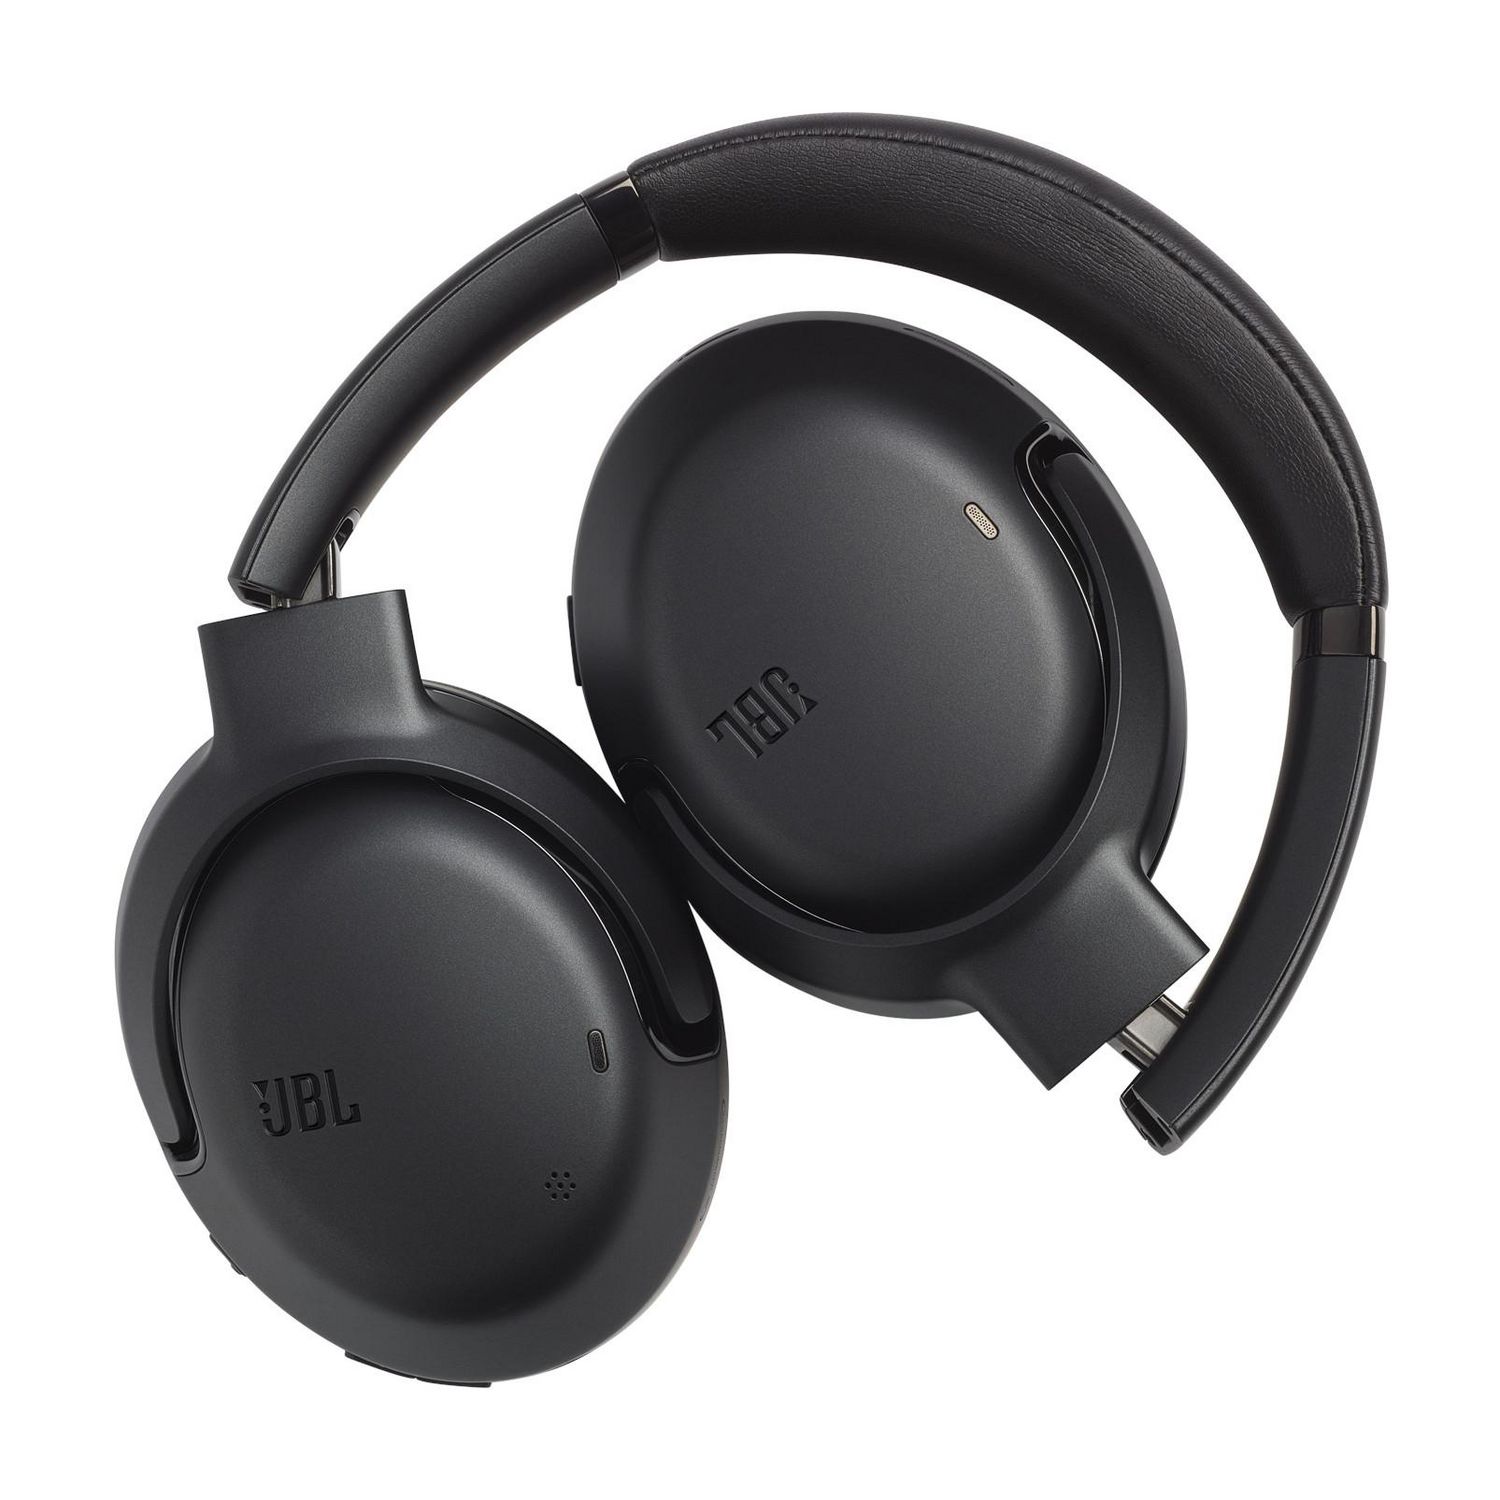 JBL TOUR ONE M2 - Wirless Over-Ear Noise Cancelling Headphones